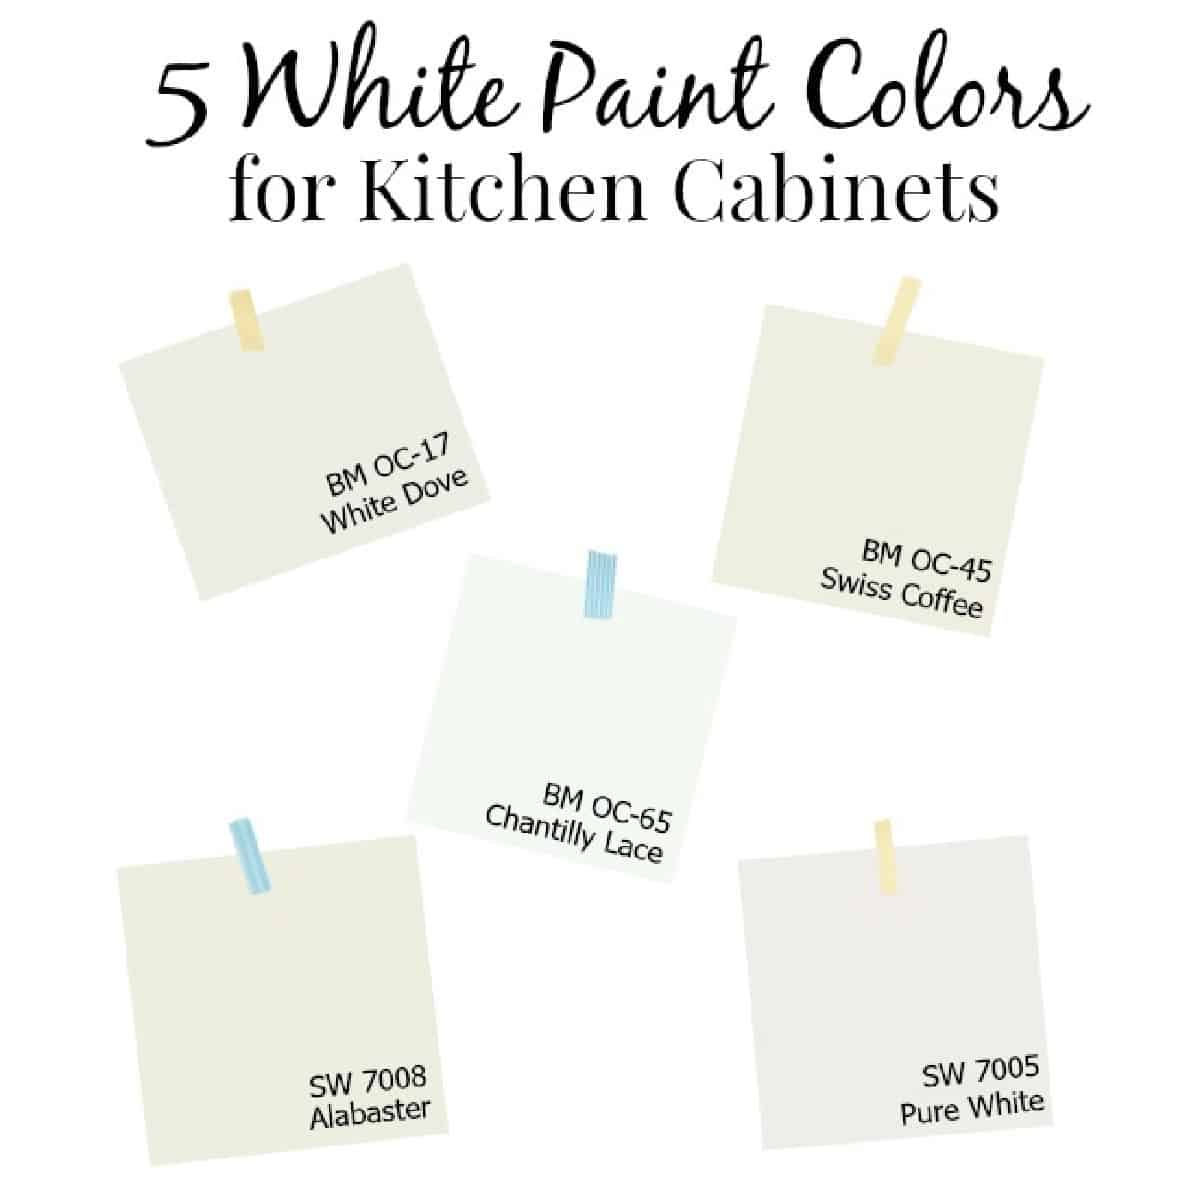 Choosing the Best White Paint Color for Your Kitchen Cabinets